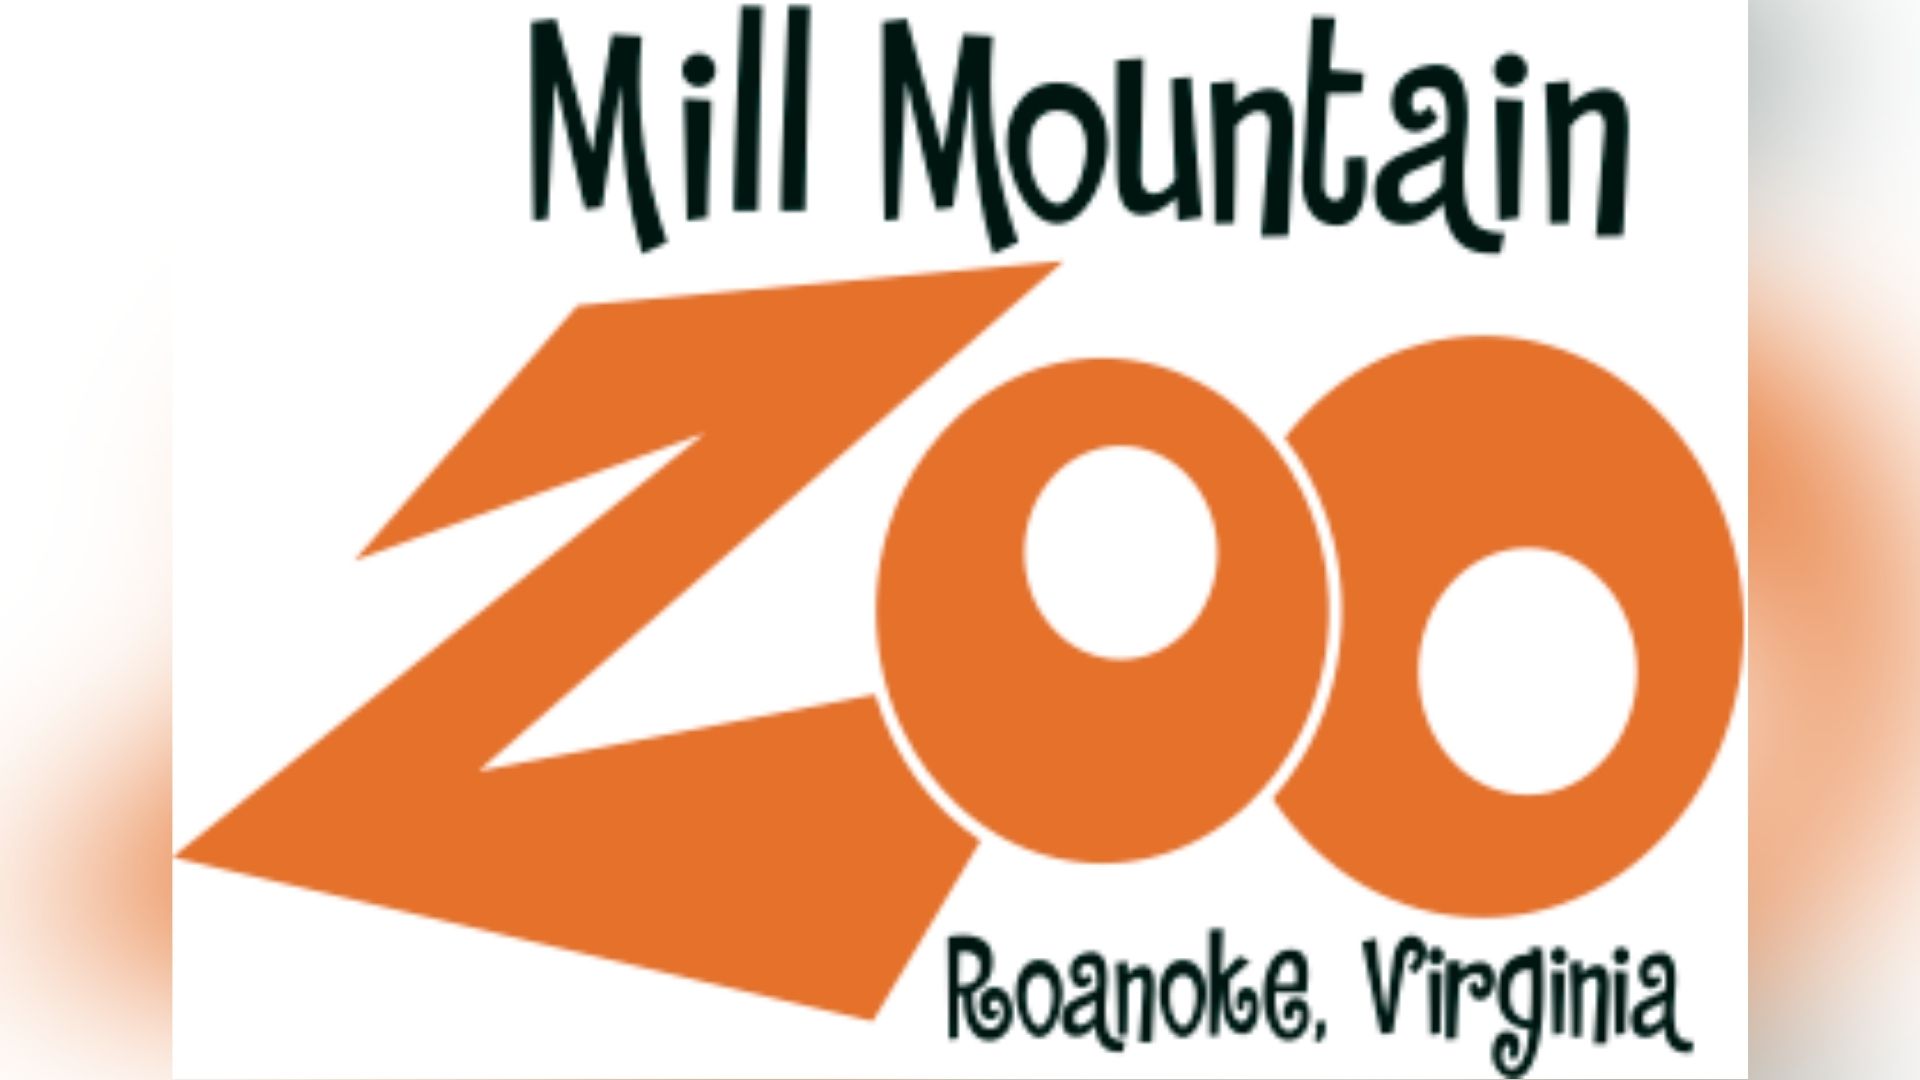 Summer camp hosted by Mill Mountain Zoo